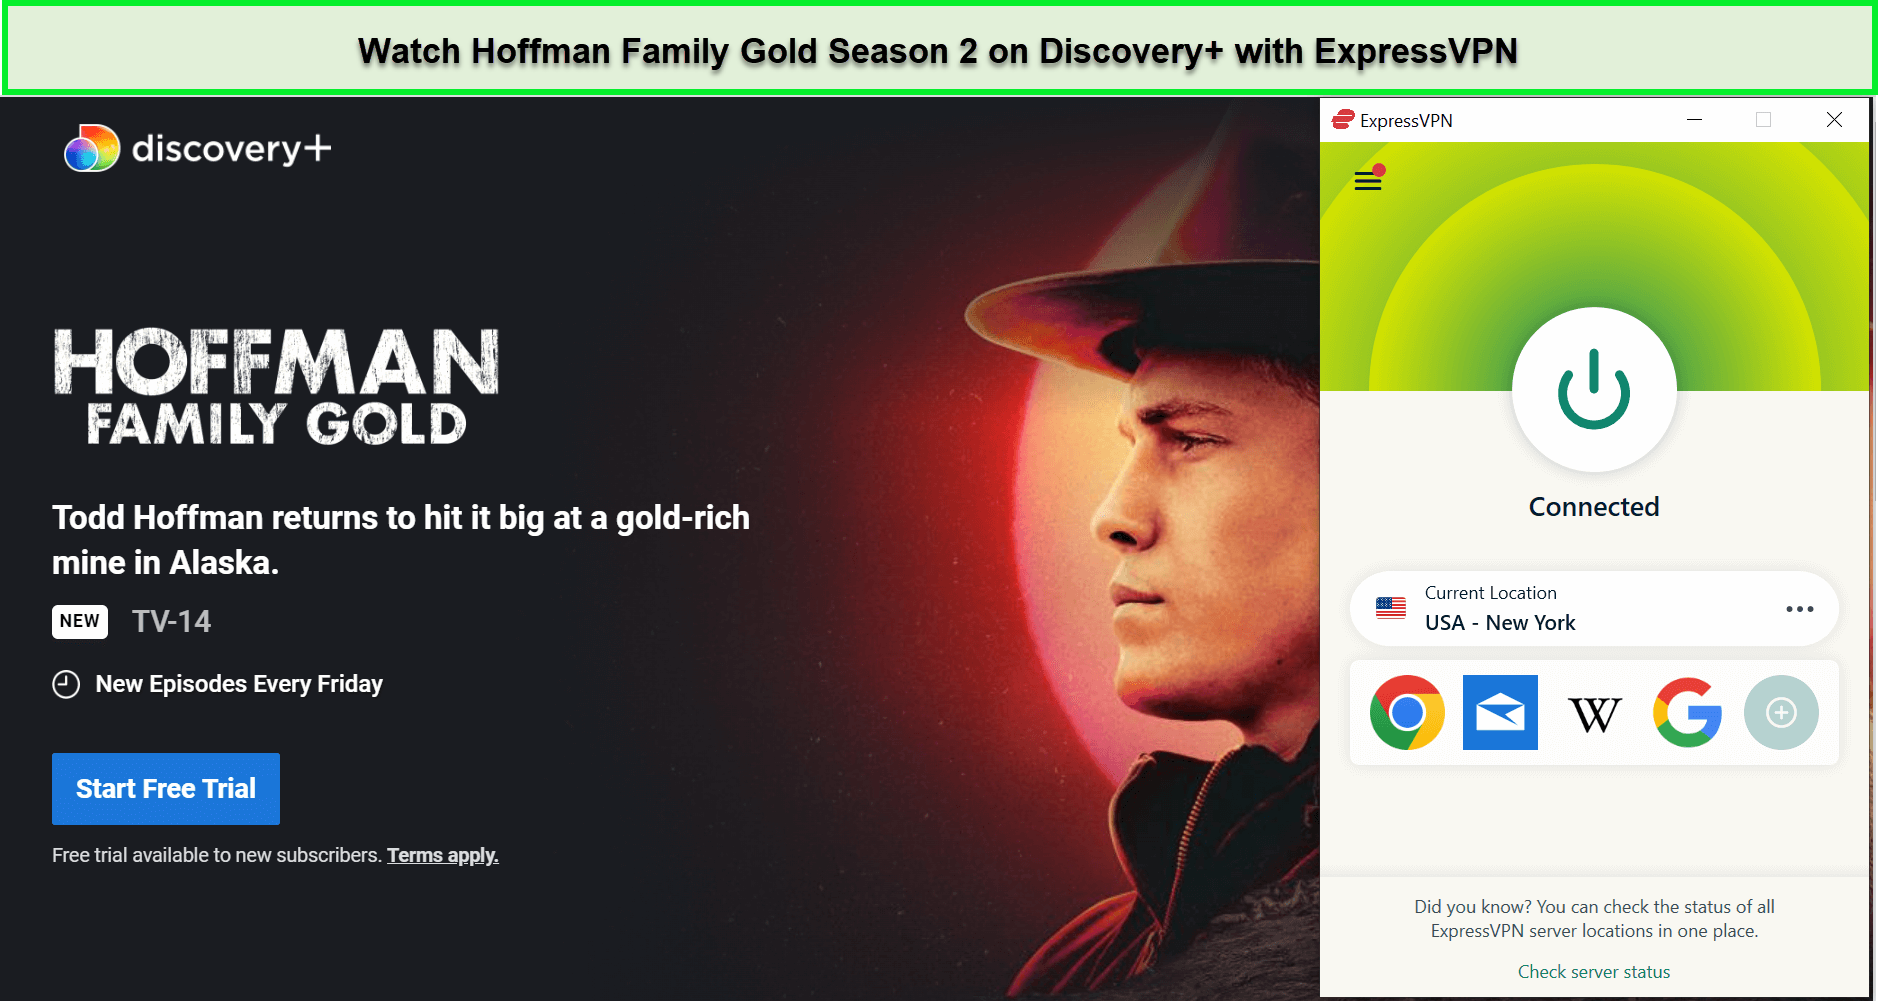 Watch-Hoffman-Family-Gold-Season-2-in-au-on-Discovery-with-ExpressVPN.